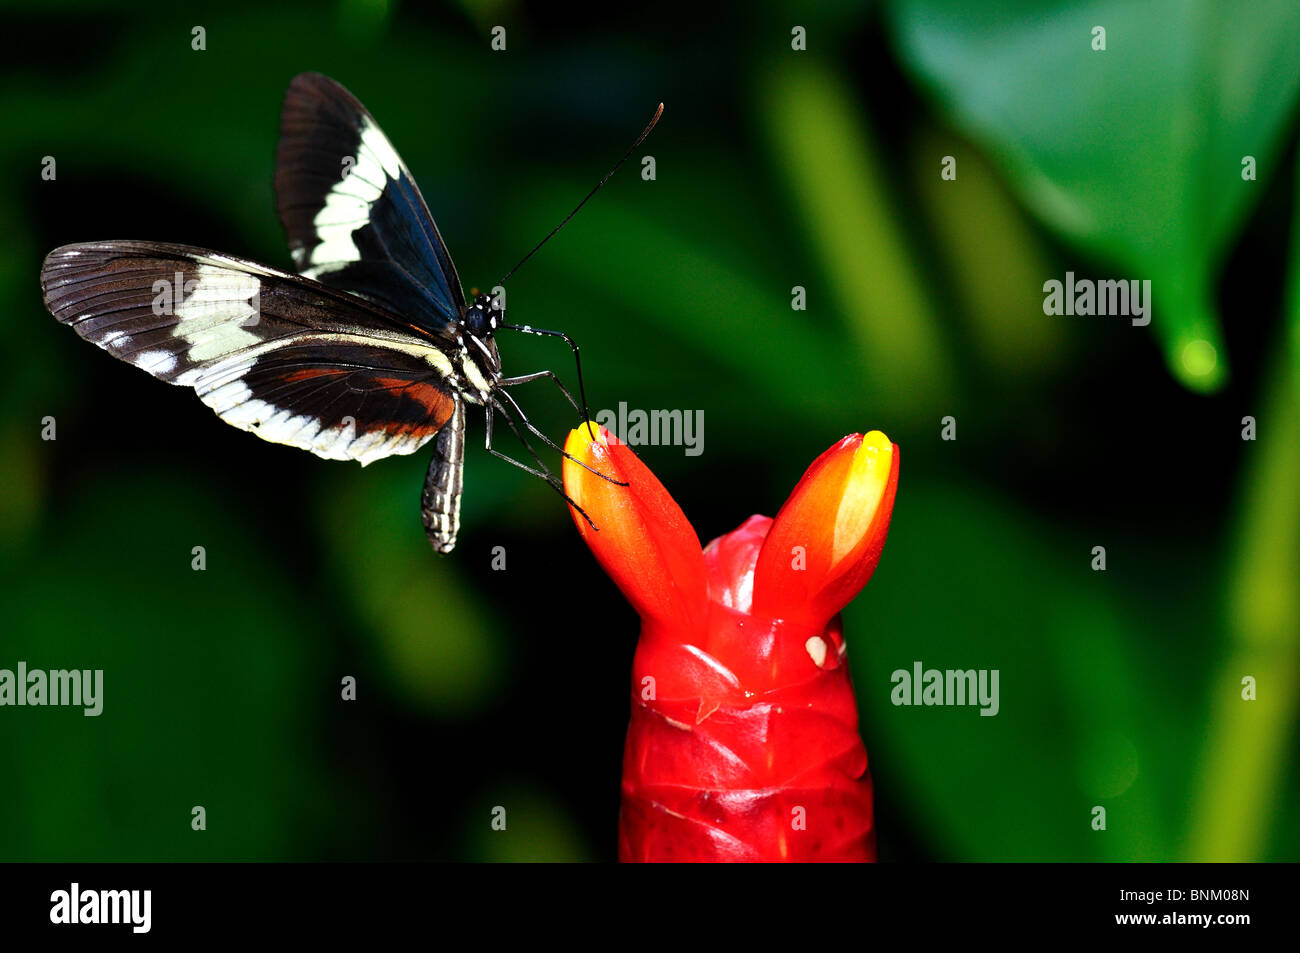 Butterfly on a red flower bulb. Stock Photo